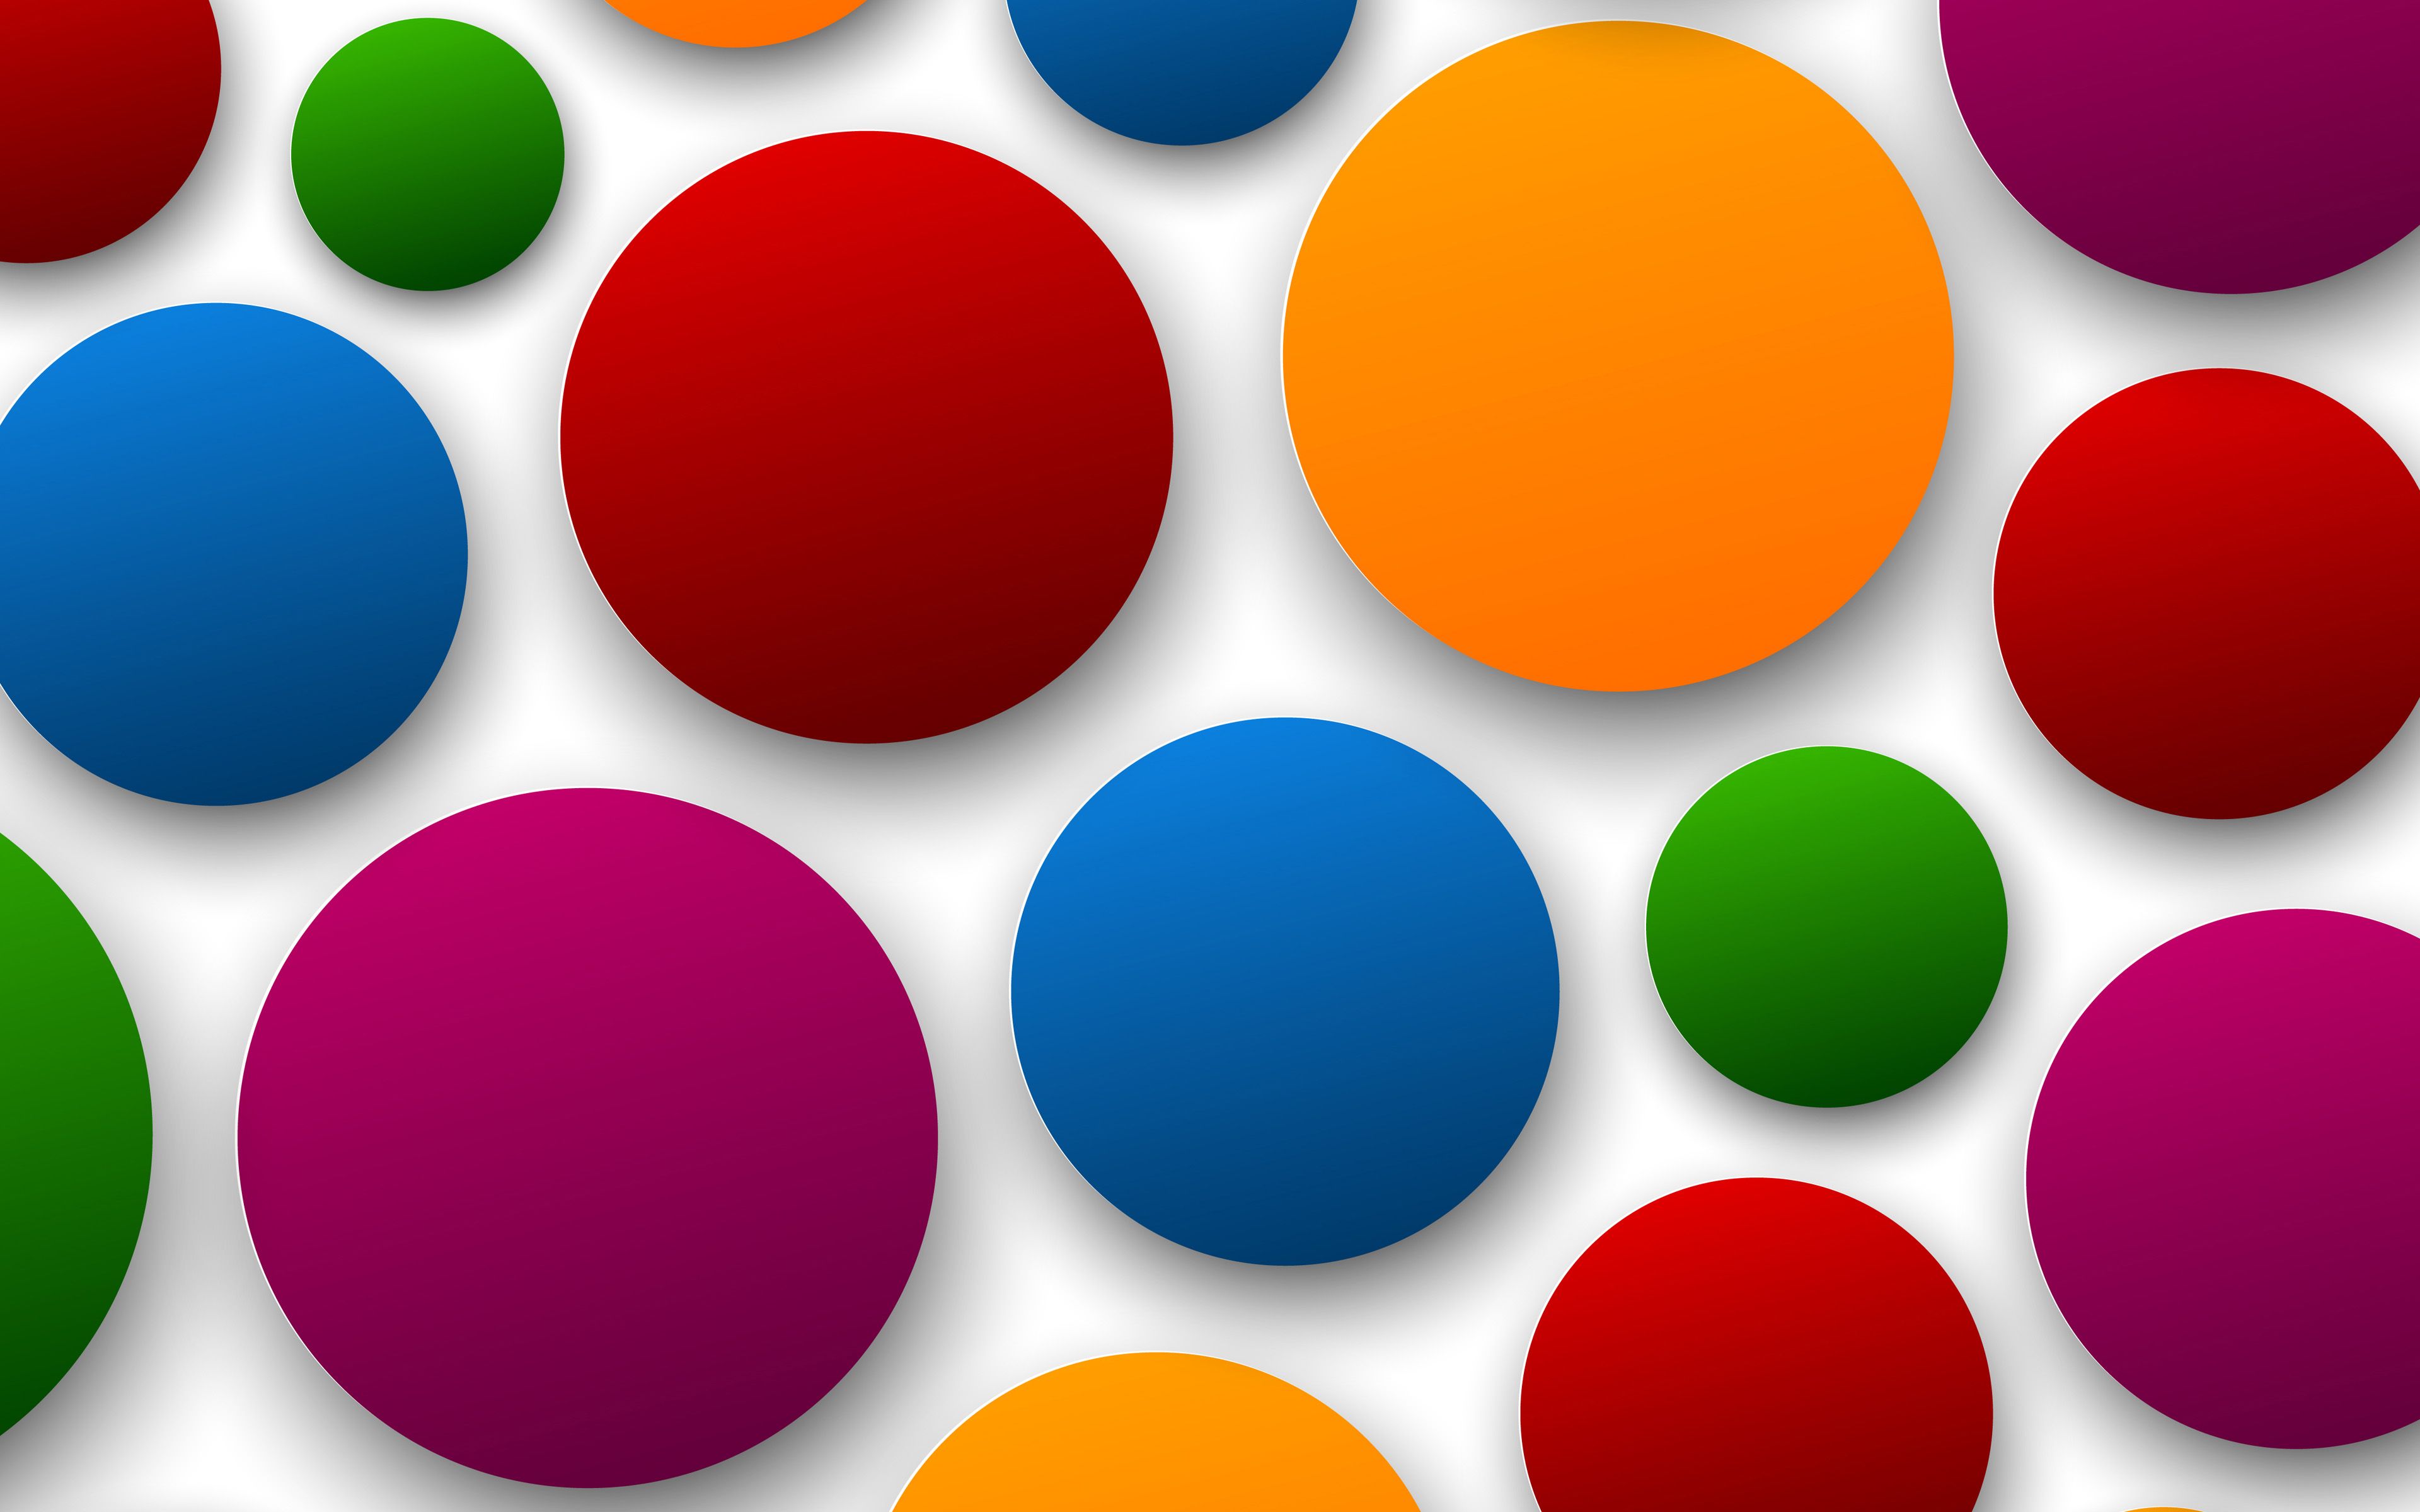 Download wallpaper colorful circles, 4k, abstract background, material design, artwork, background with circles for desktop with resolution 3840x2400. High Quality HD picture wallpaper